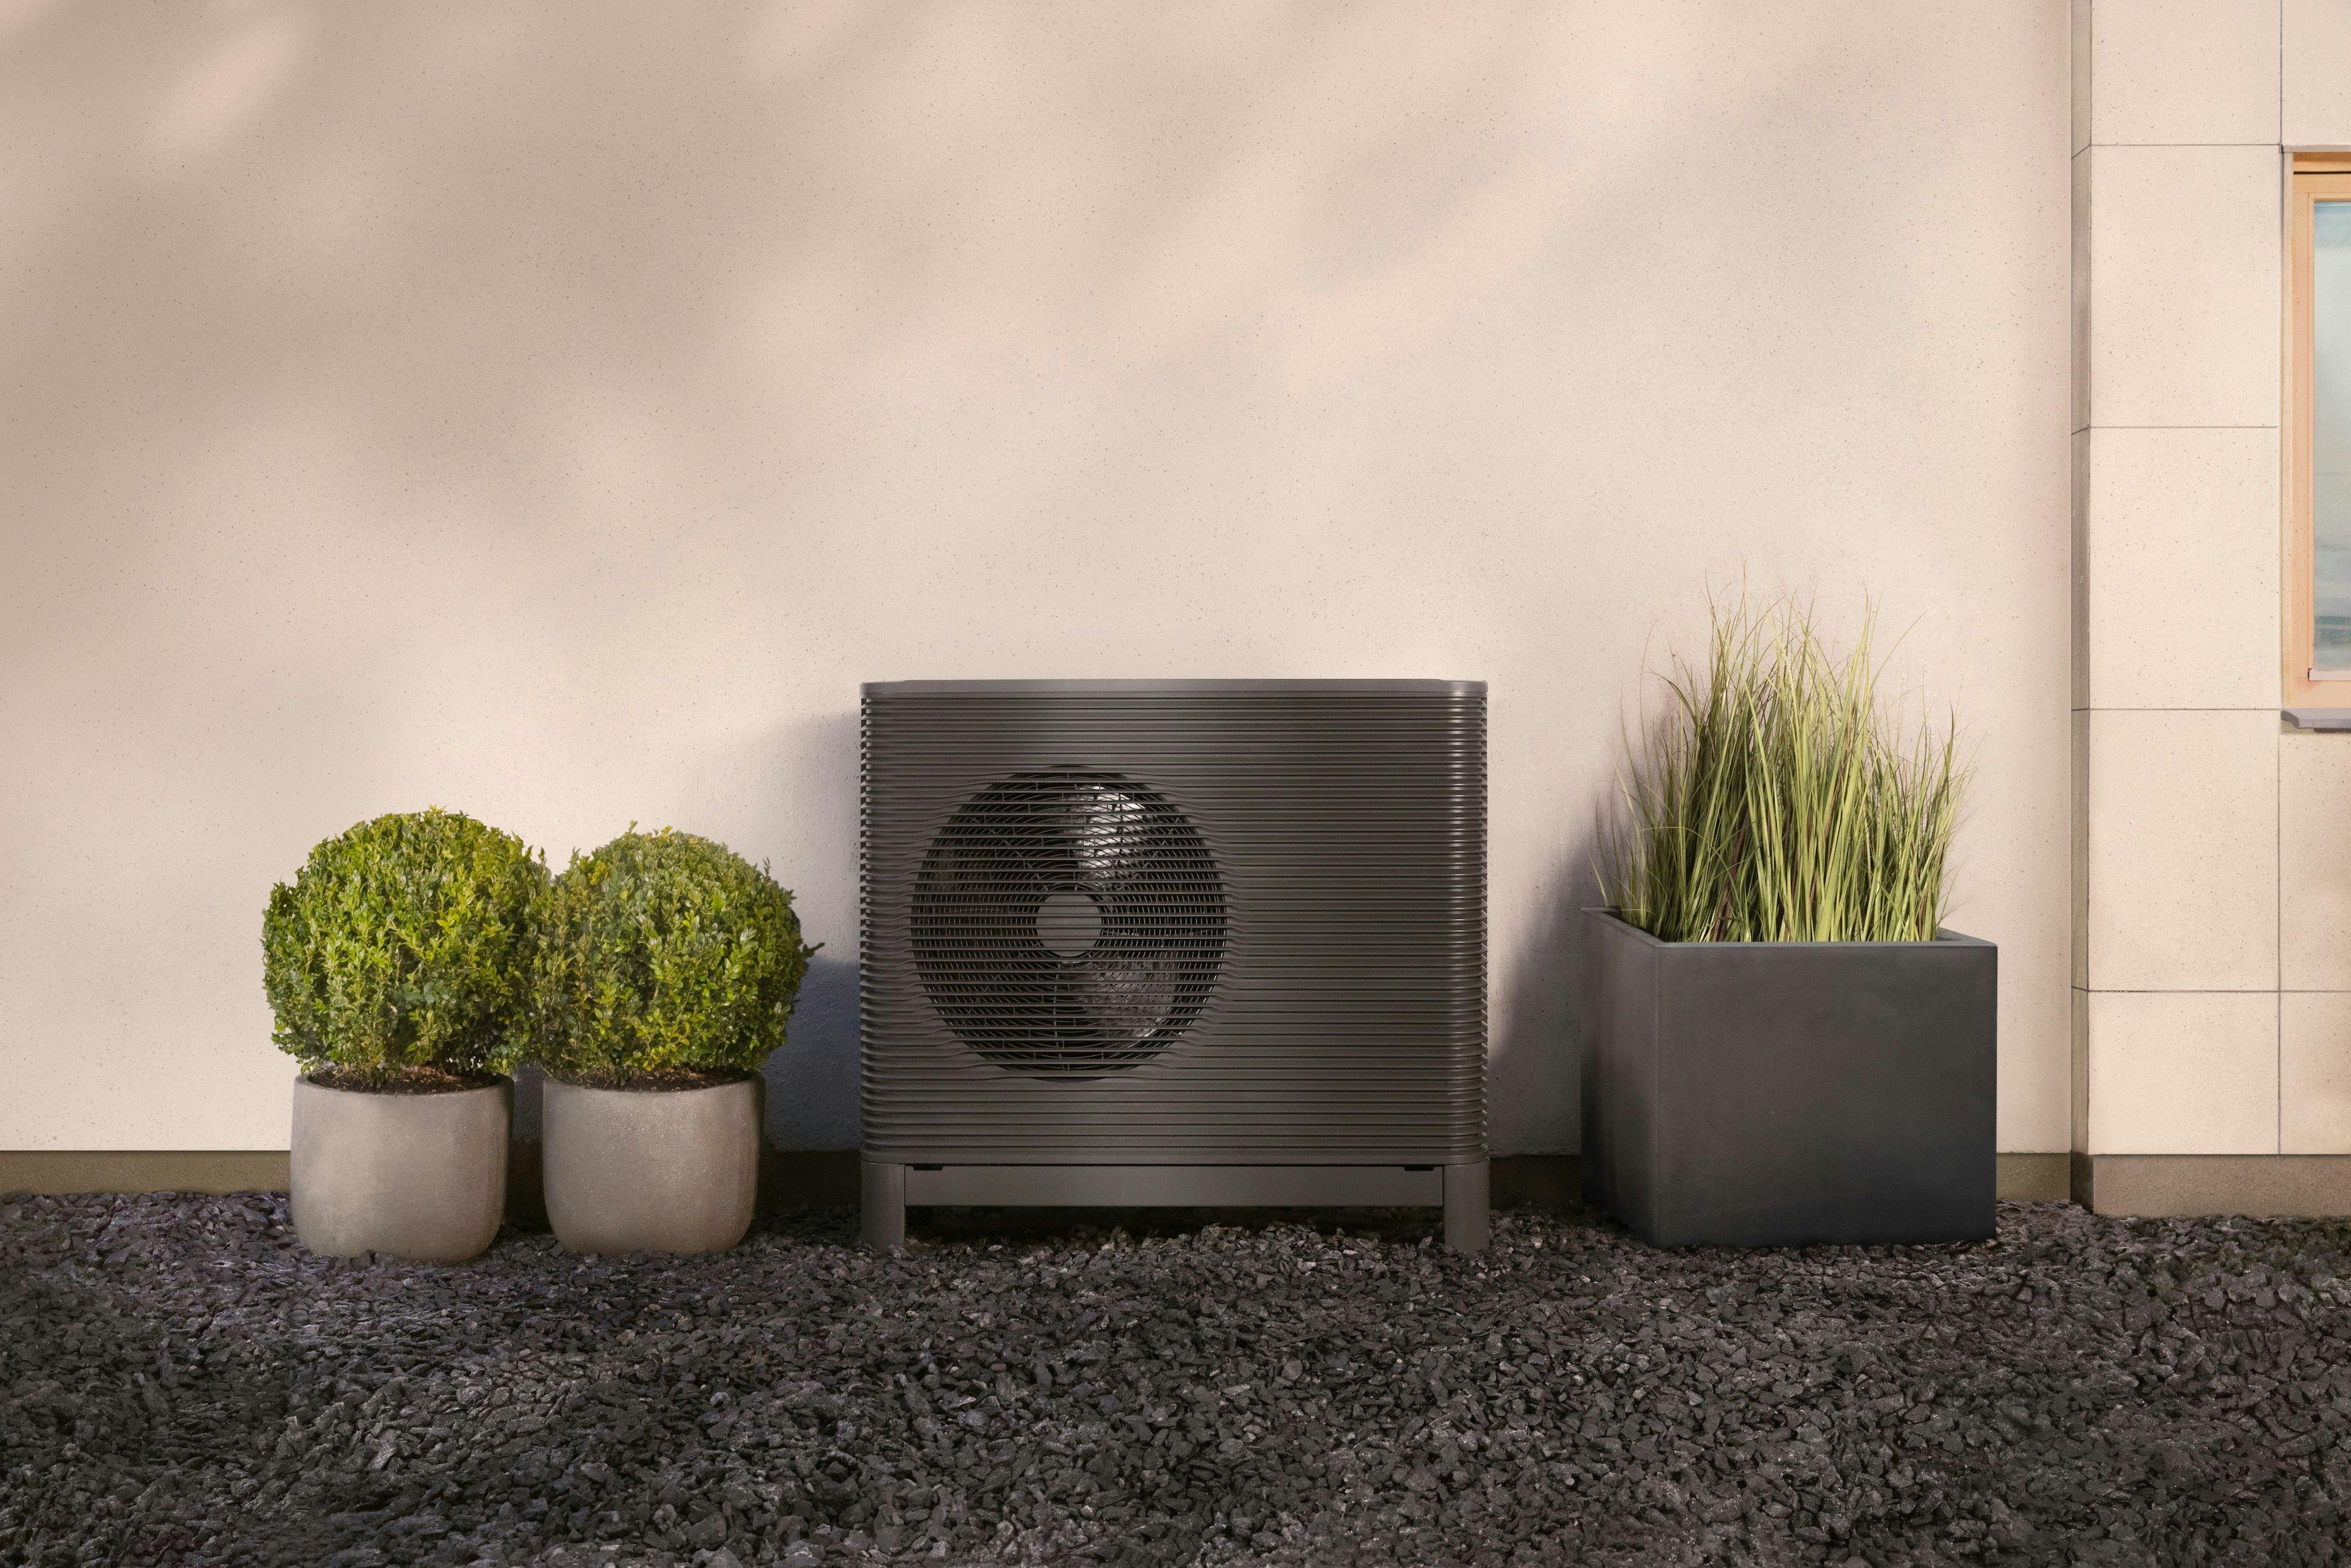 Aira heat pump outdoor unit face on against a wall with some potted plants either side